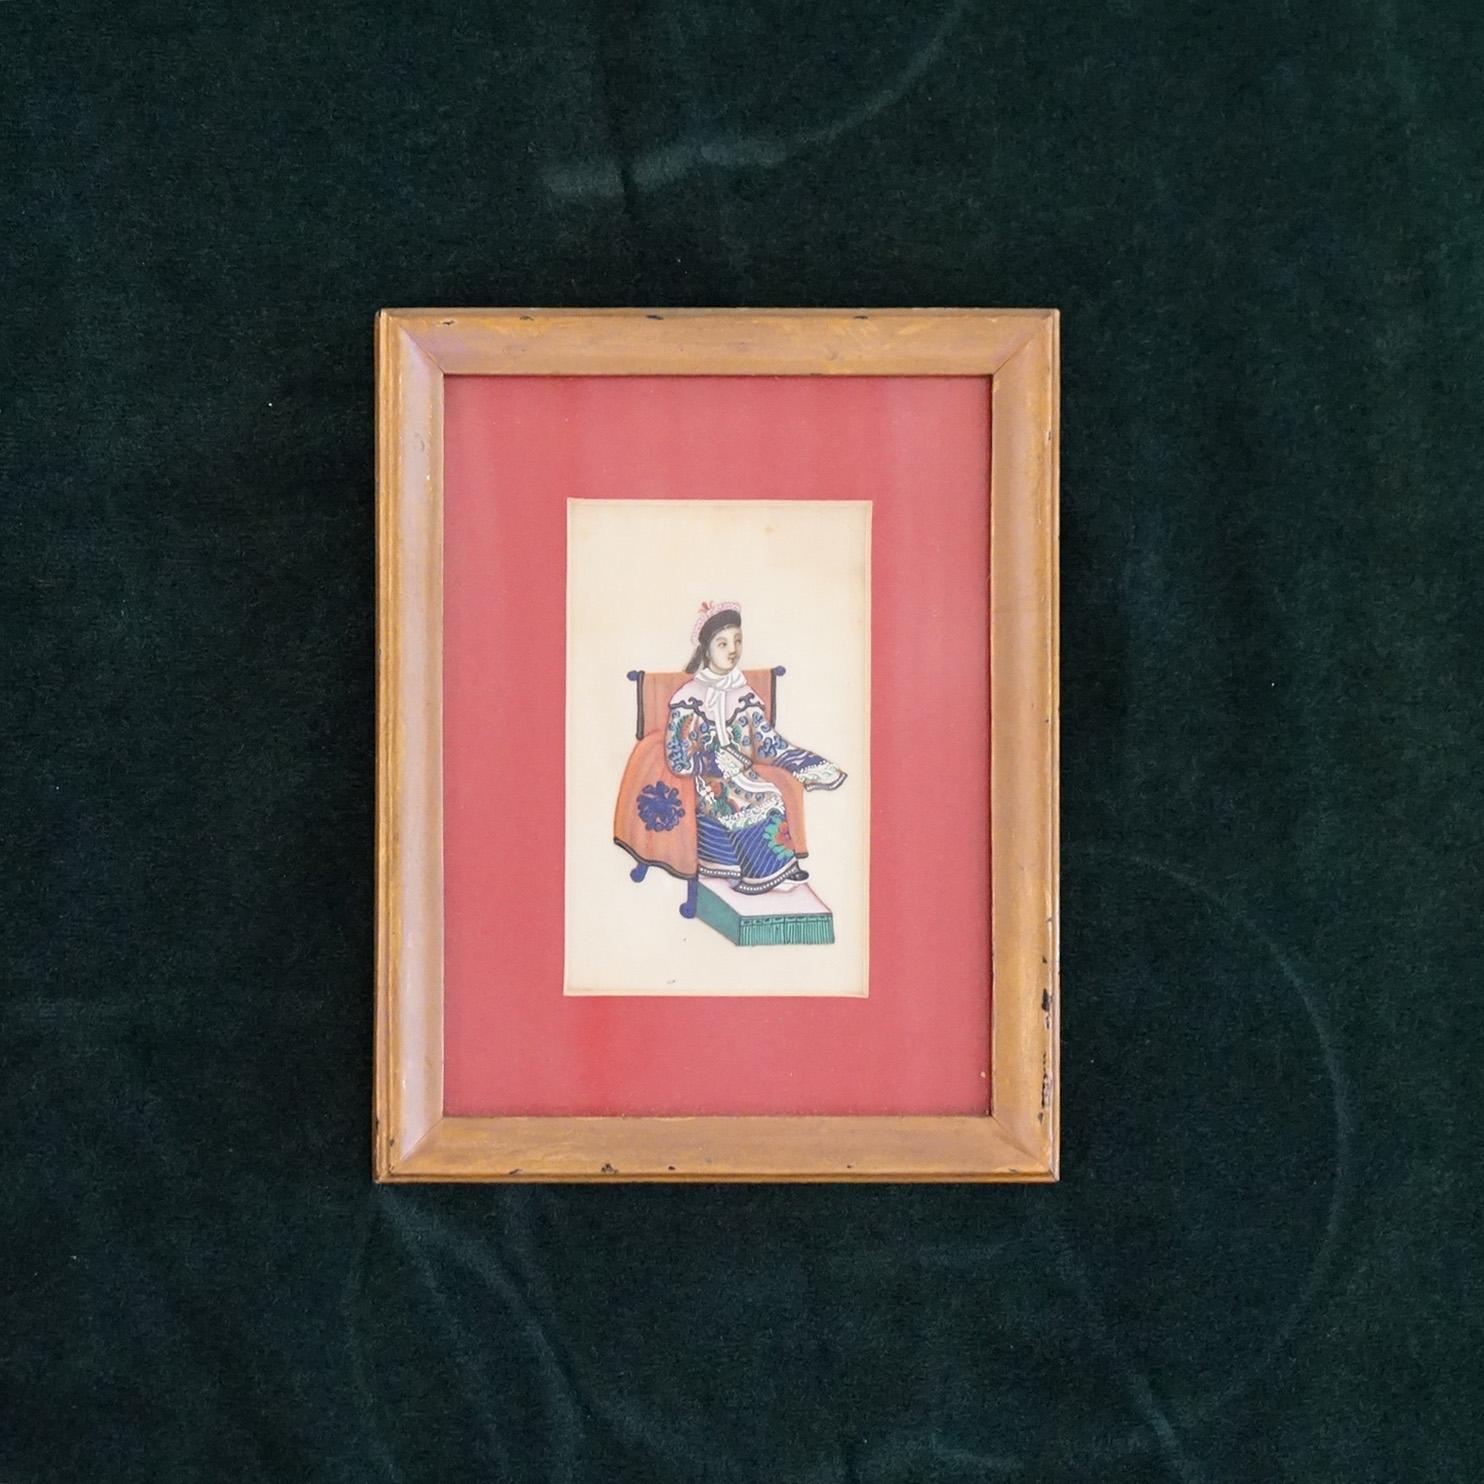 Six Miniature Chinese Figural Paintings on Silk, Framed, 20thC

Measures- Single: 7.25''H x 5.75''W x .75''D; All Others: 6.25''H x 8.25''W x 1''D